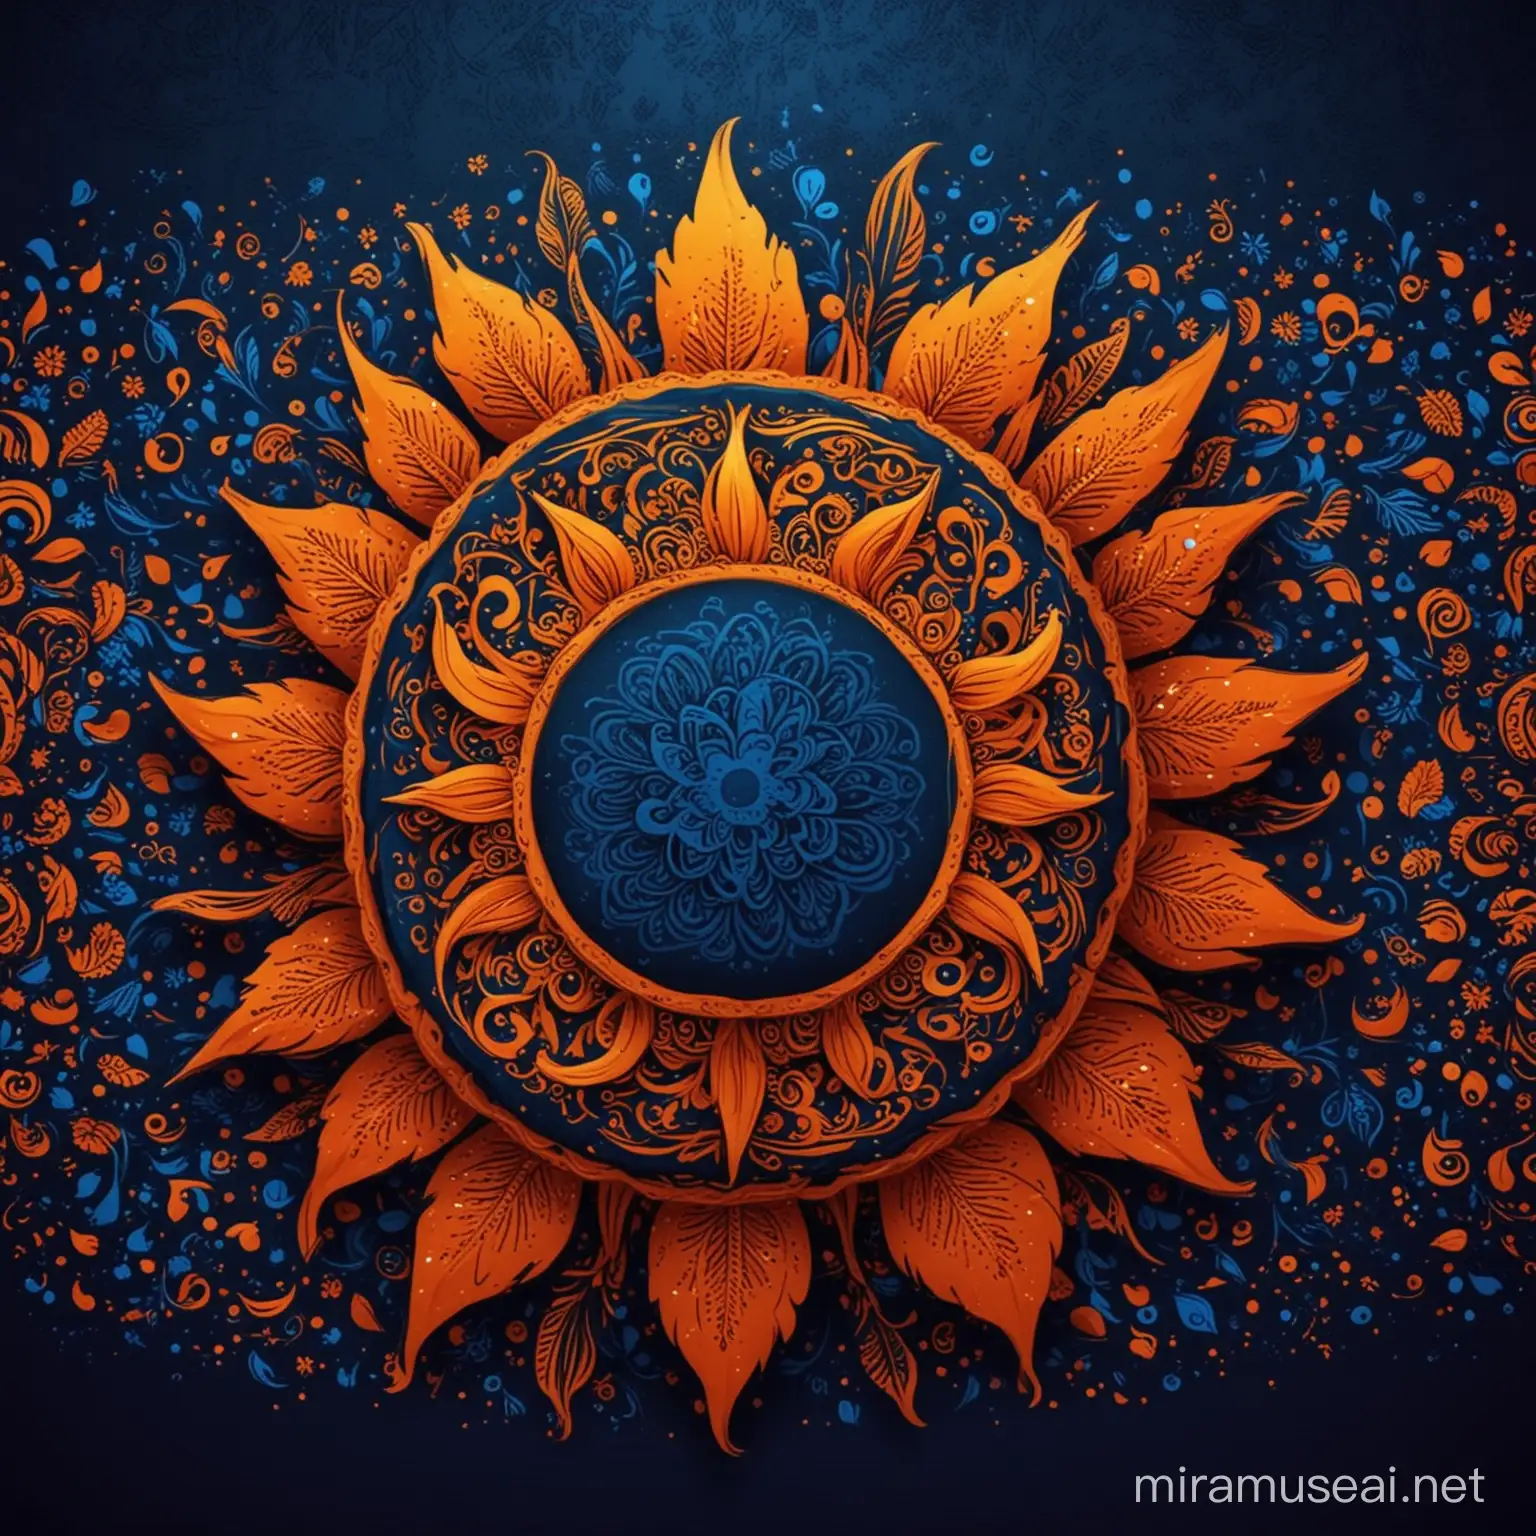 design a background with authentic sri lankan artistic designs with the artistic sun based design and elements of sri lankan new year with bright colours like orange and dark blue
